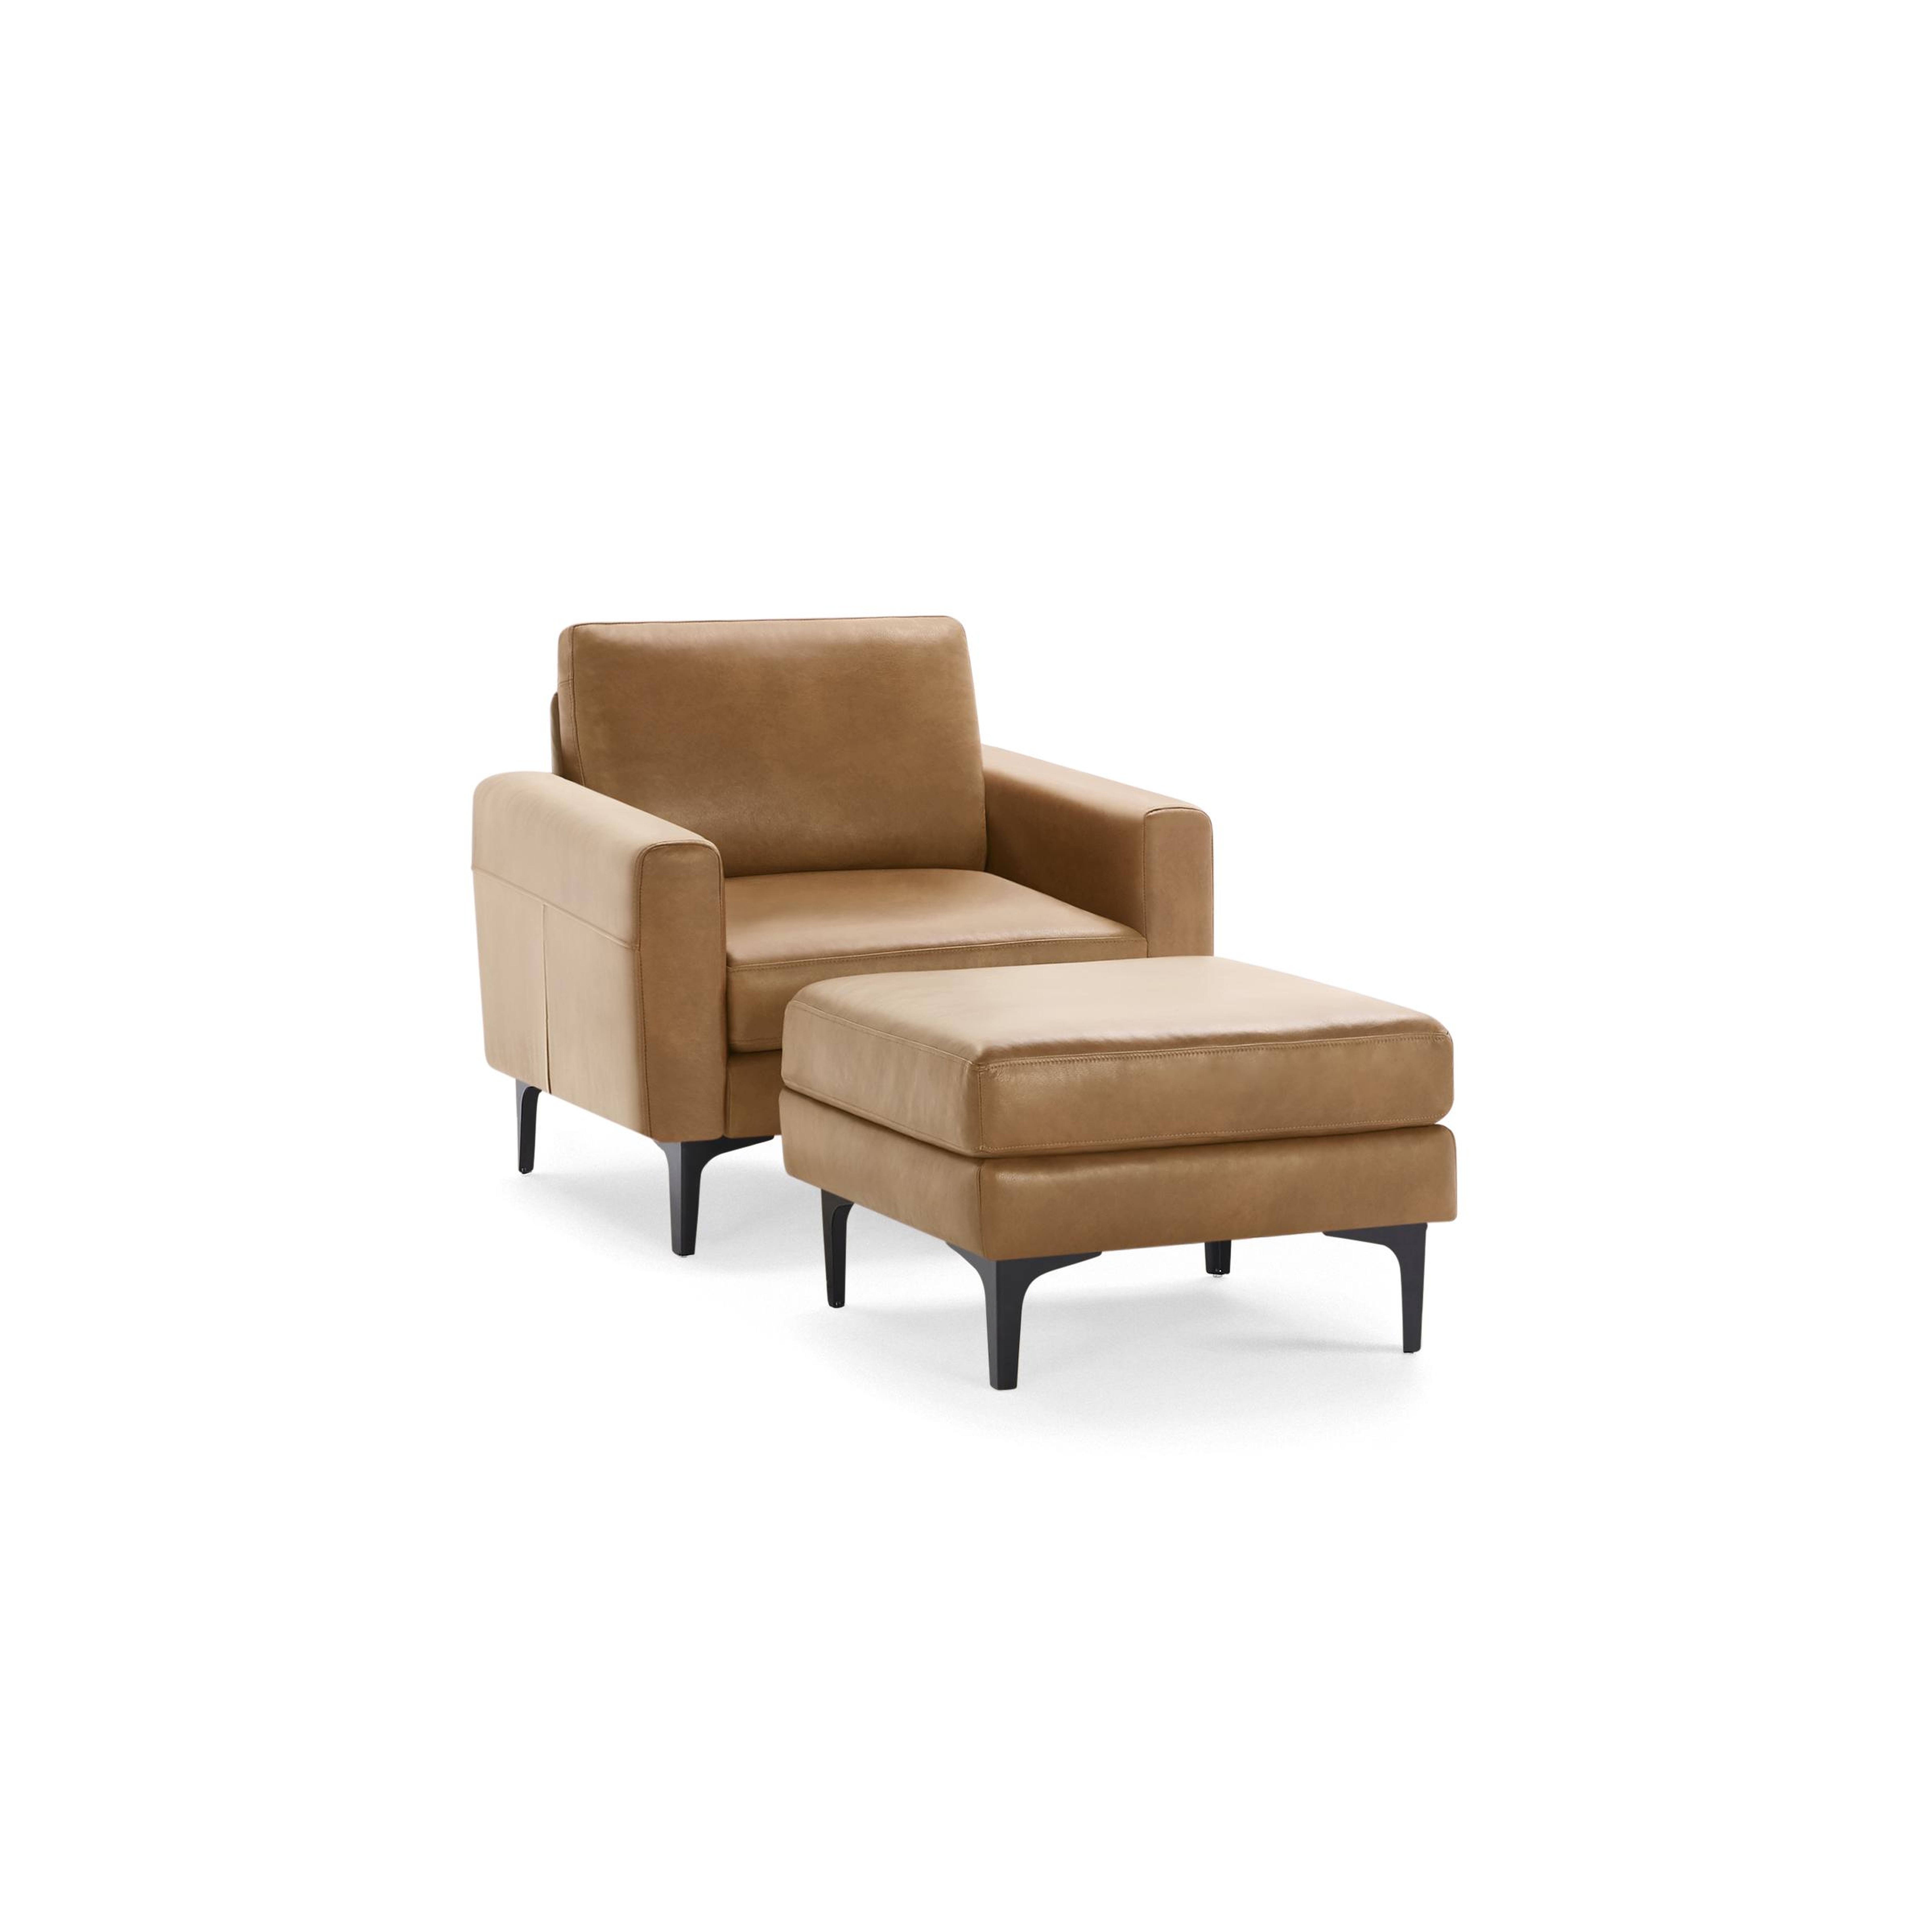 The Block Nomad Leather Armchair with Ottoman in Camel - Burrow